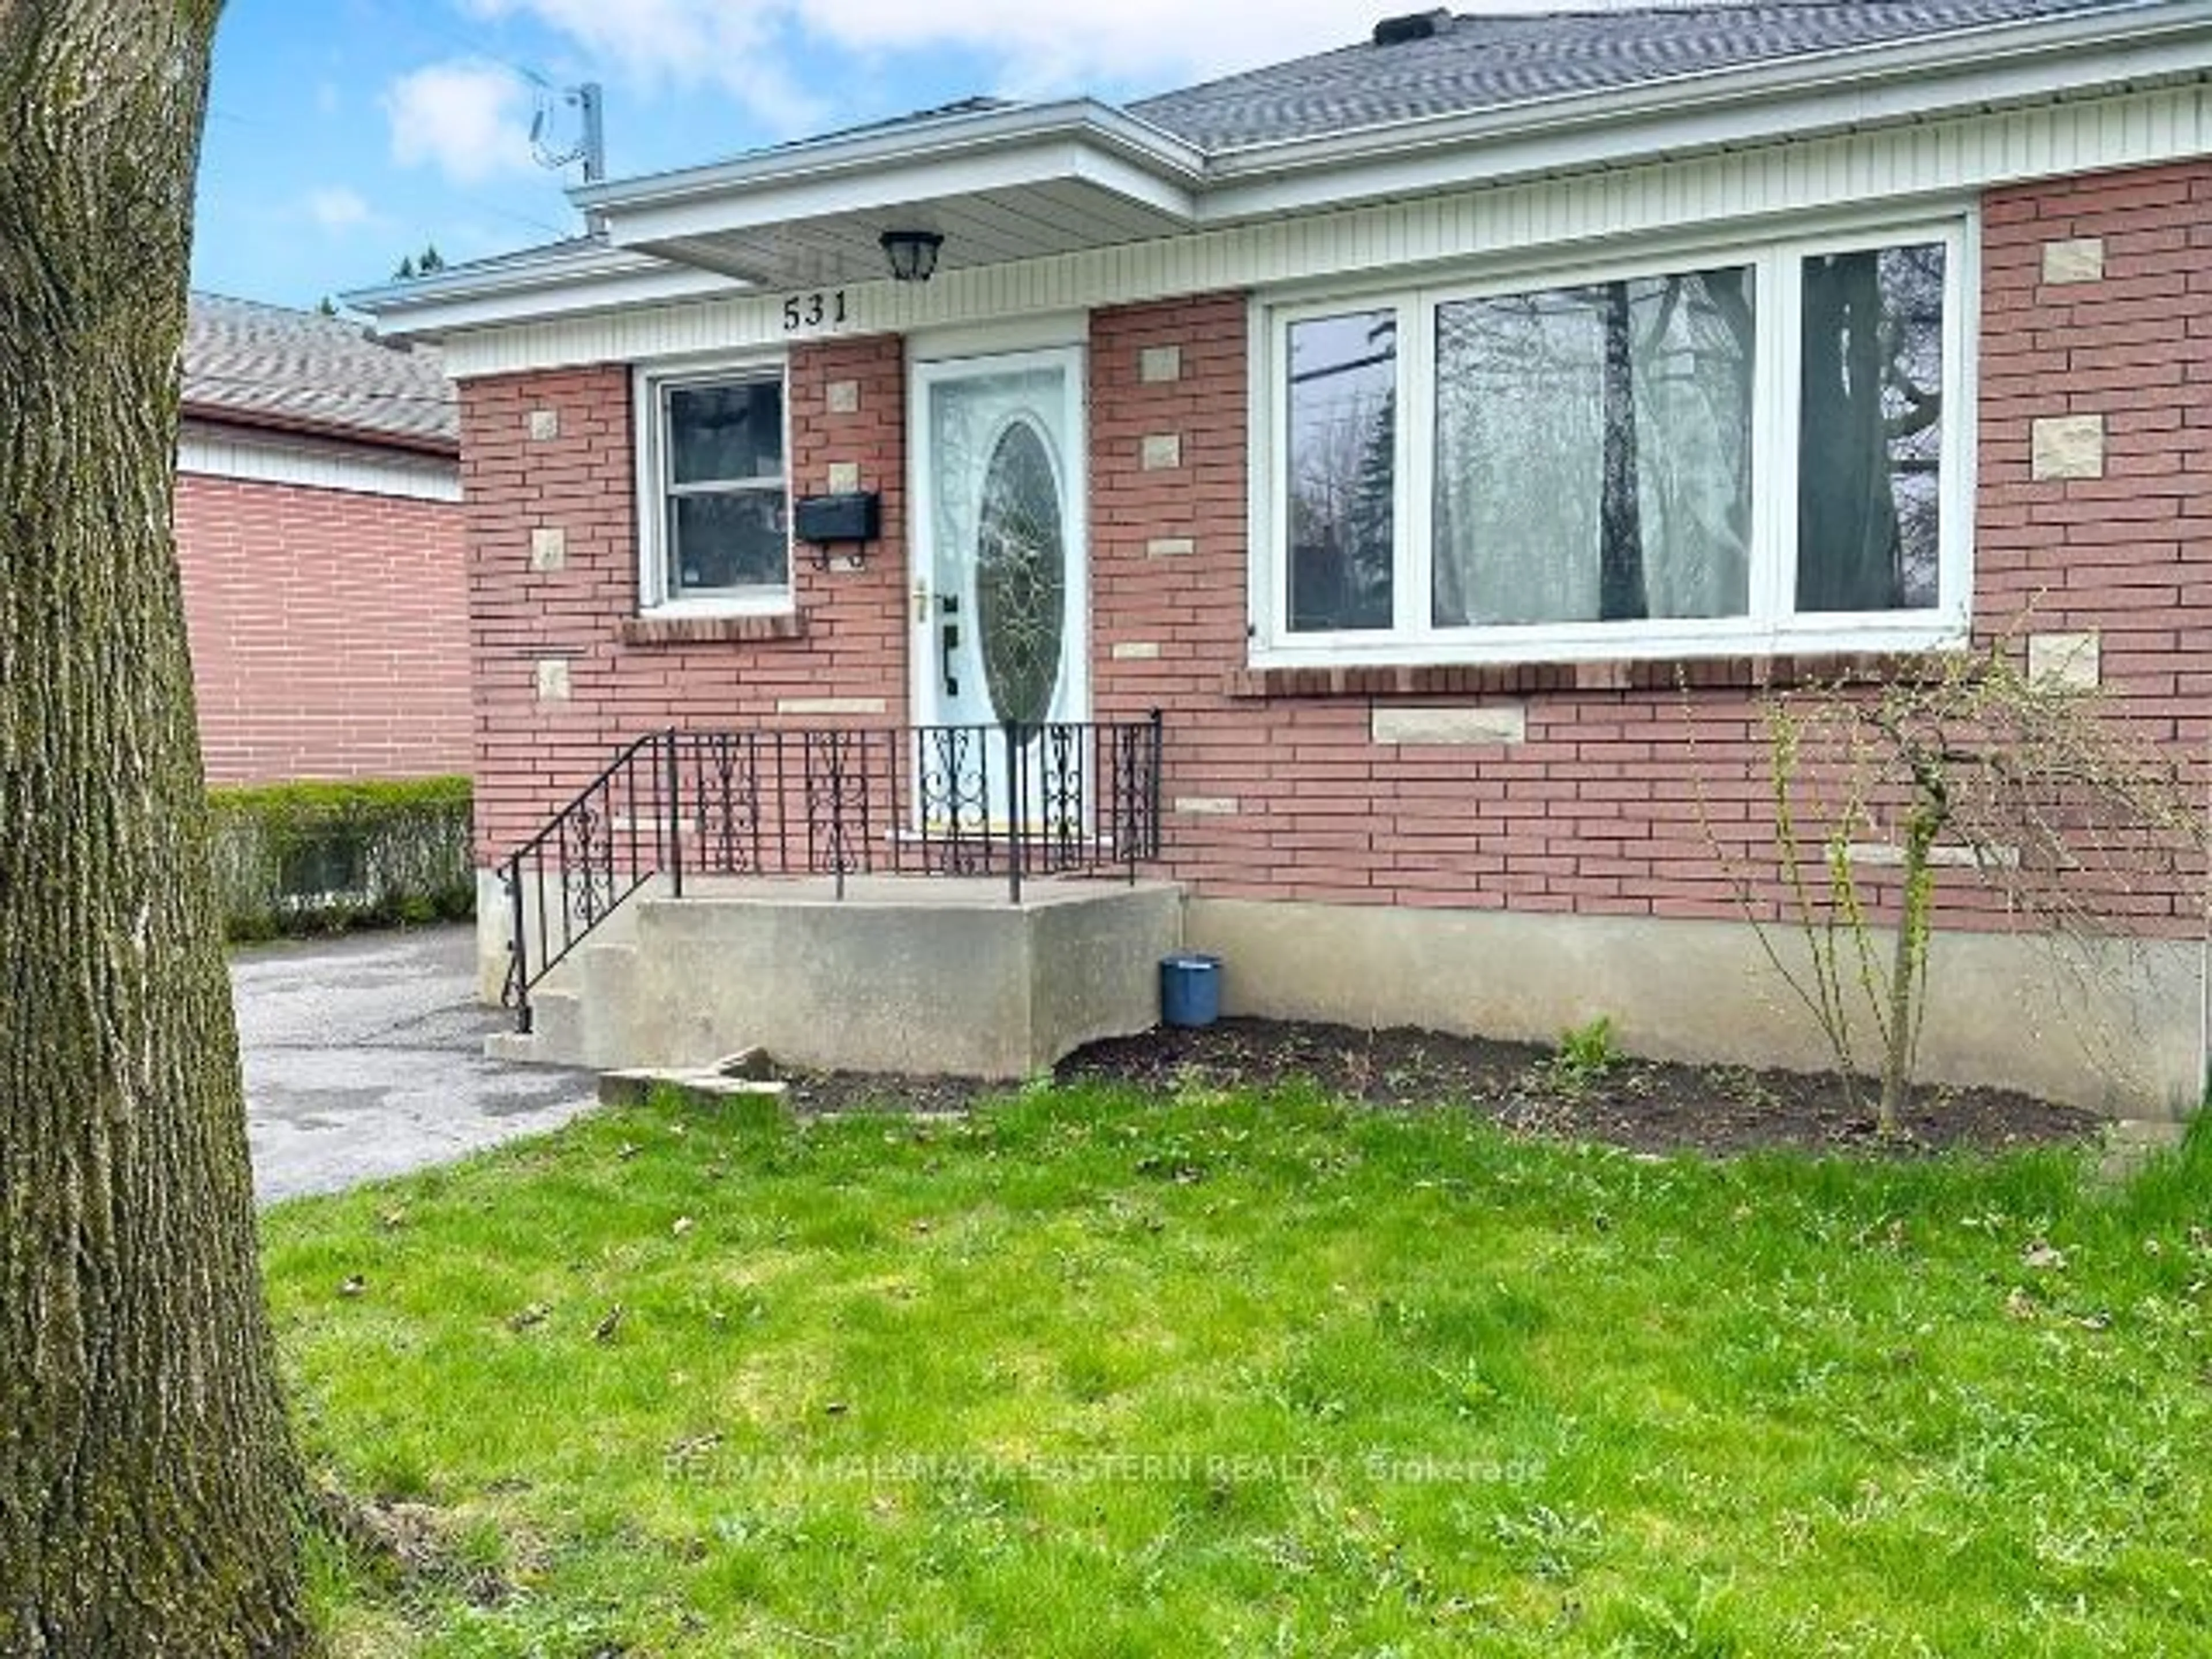 Frontside or backside of a home for 531 Monaghan Rd, Peterborough Ontario K9J 5H6